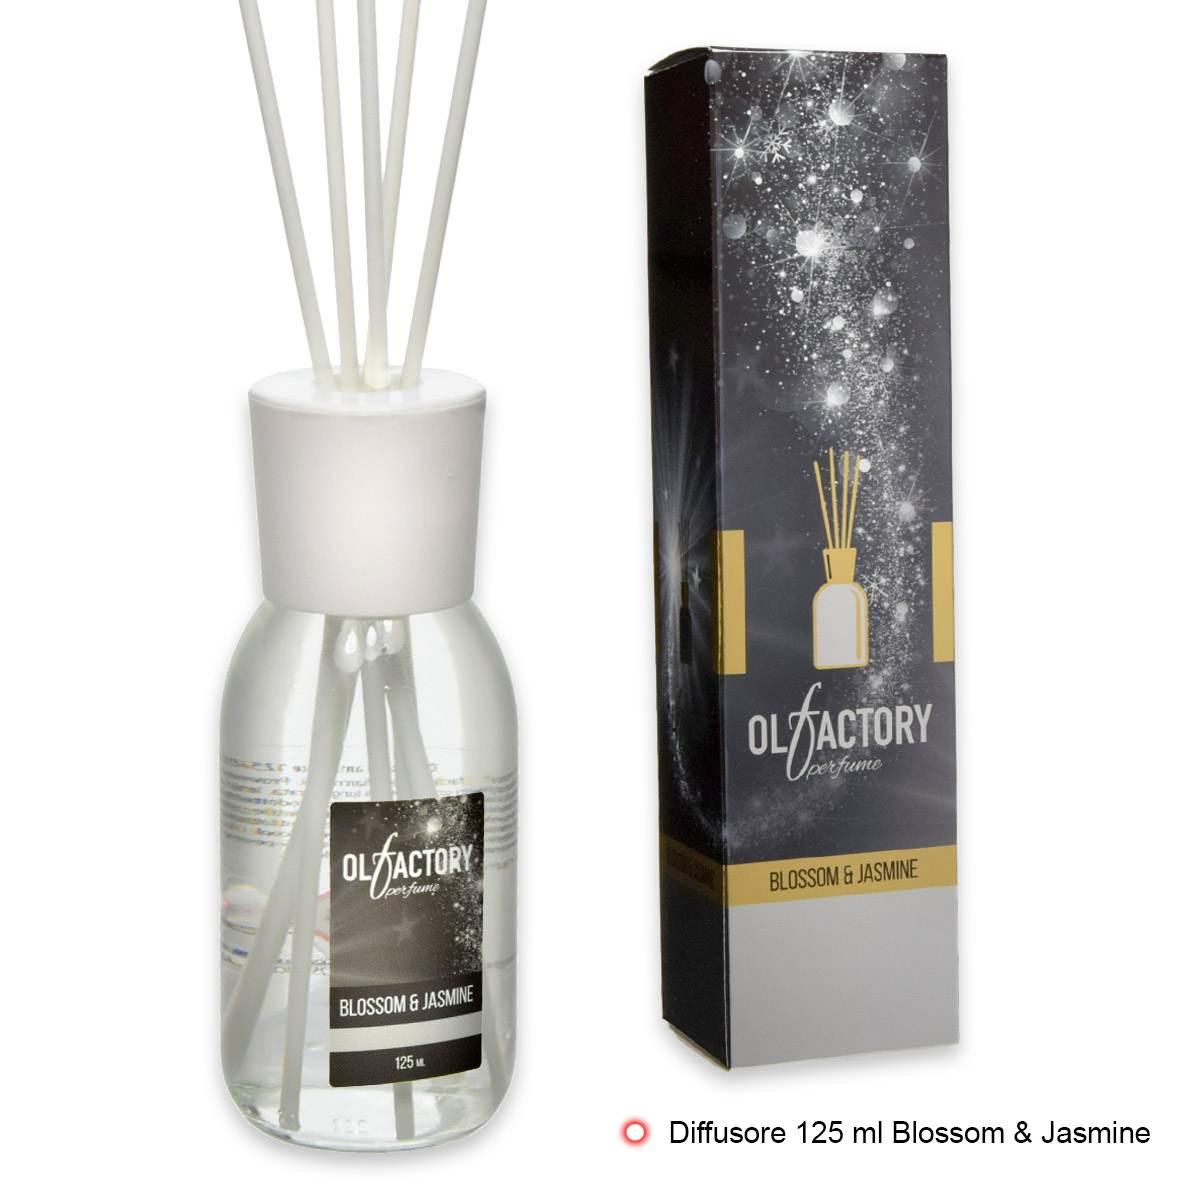 Olfactory diffusore ambiente 125 ml blossom